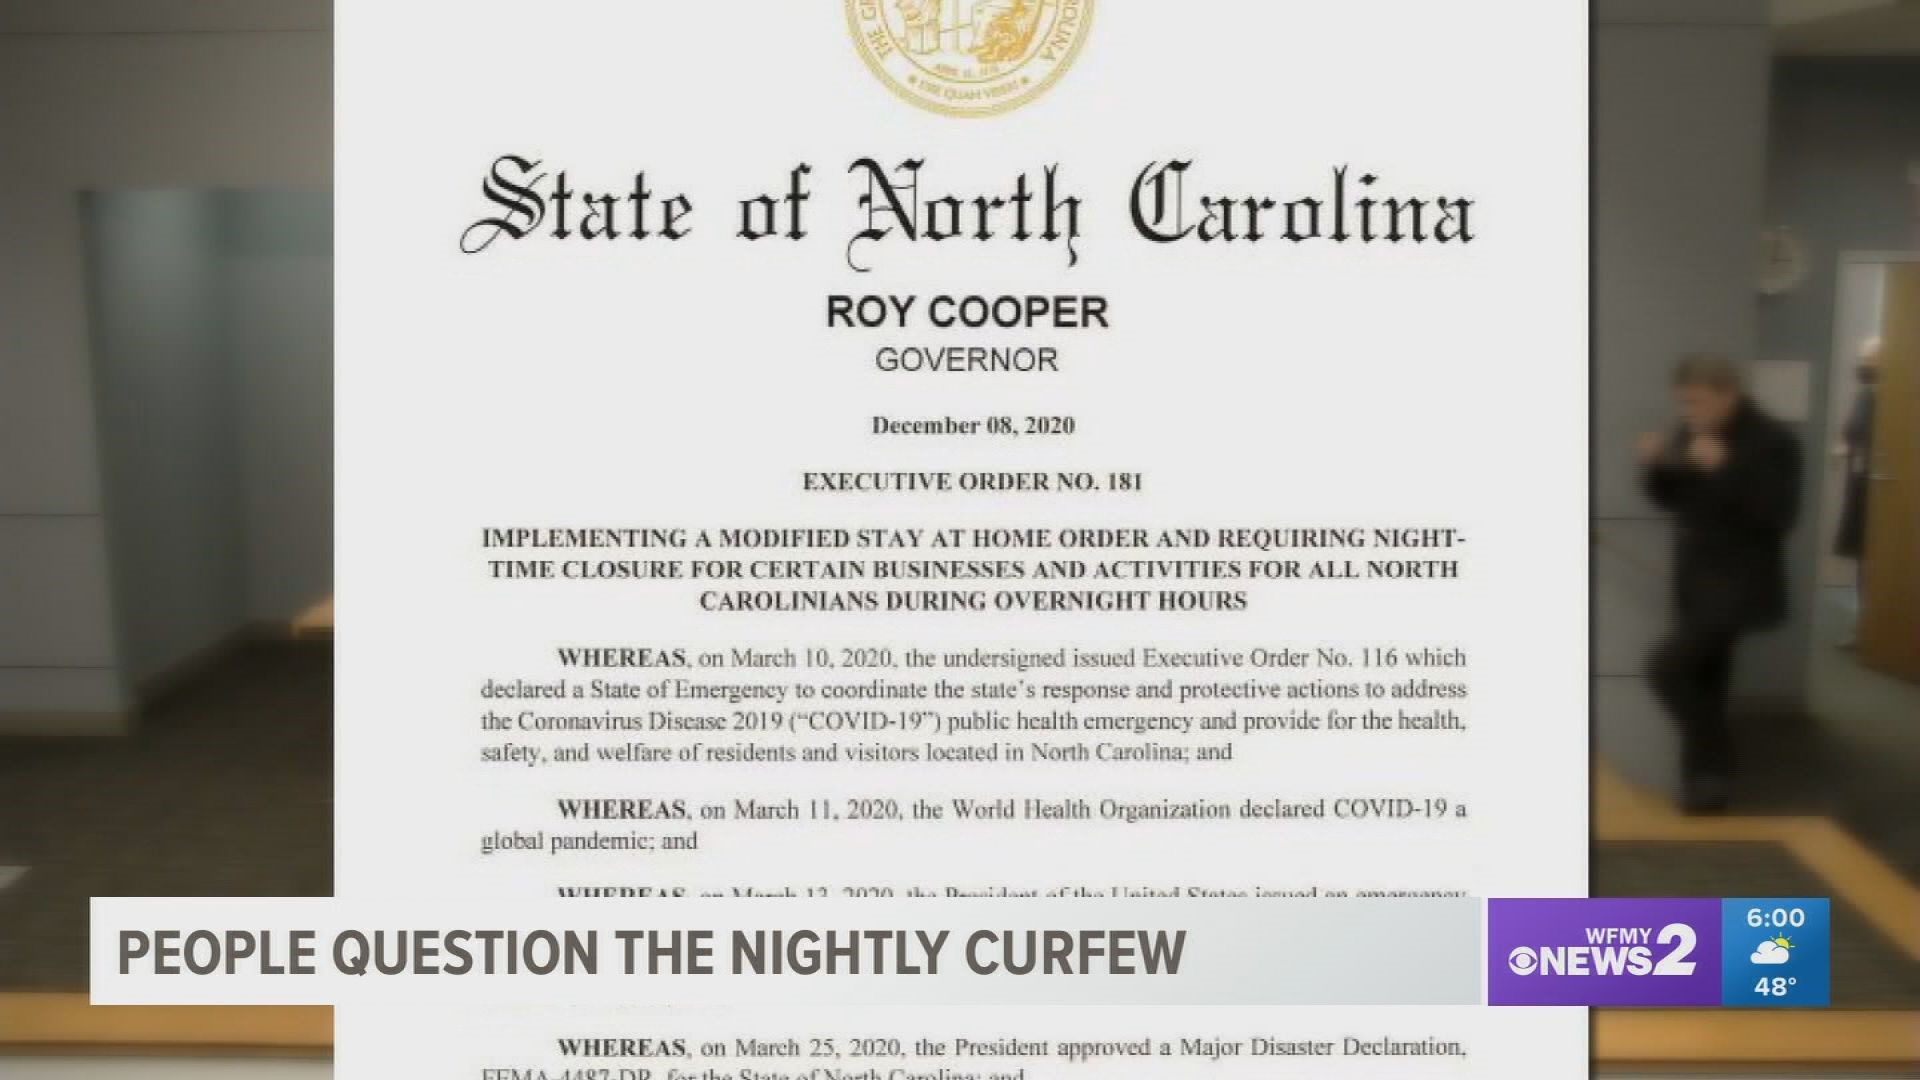 North Carolina's new stay-at-home order is between 10 p.m. and 5 a.m. State health officials say the issue is more about what people do during that time period.